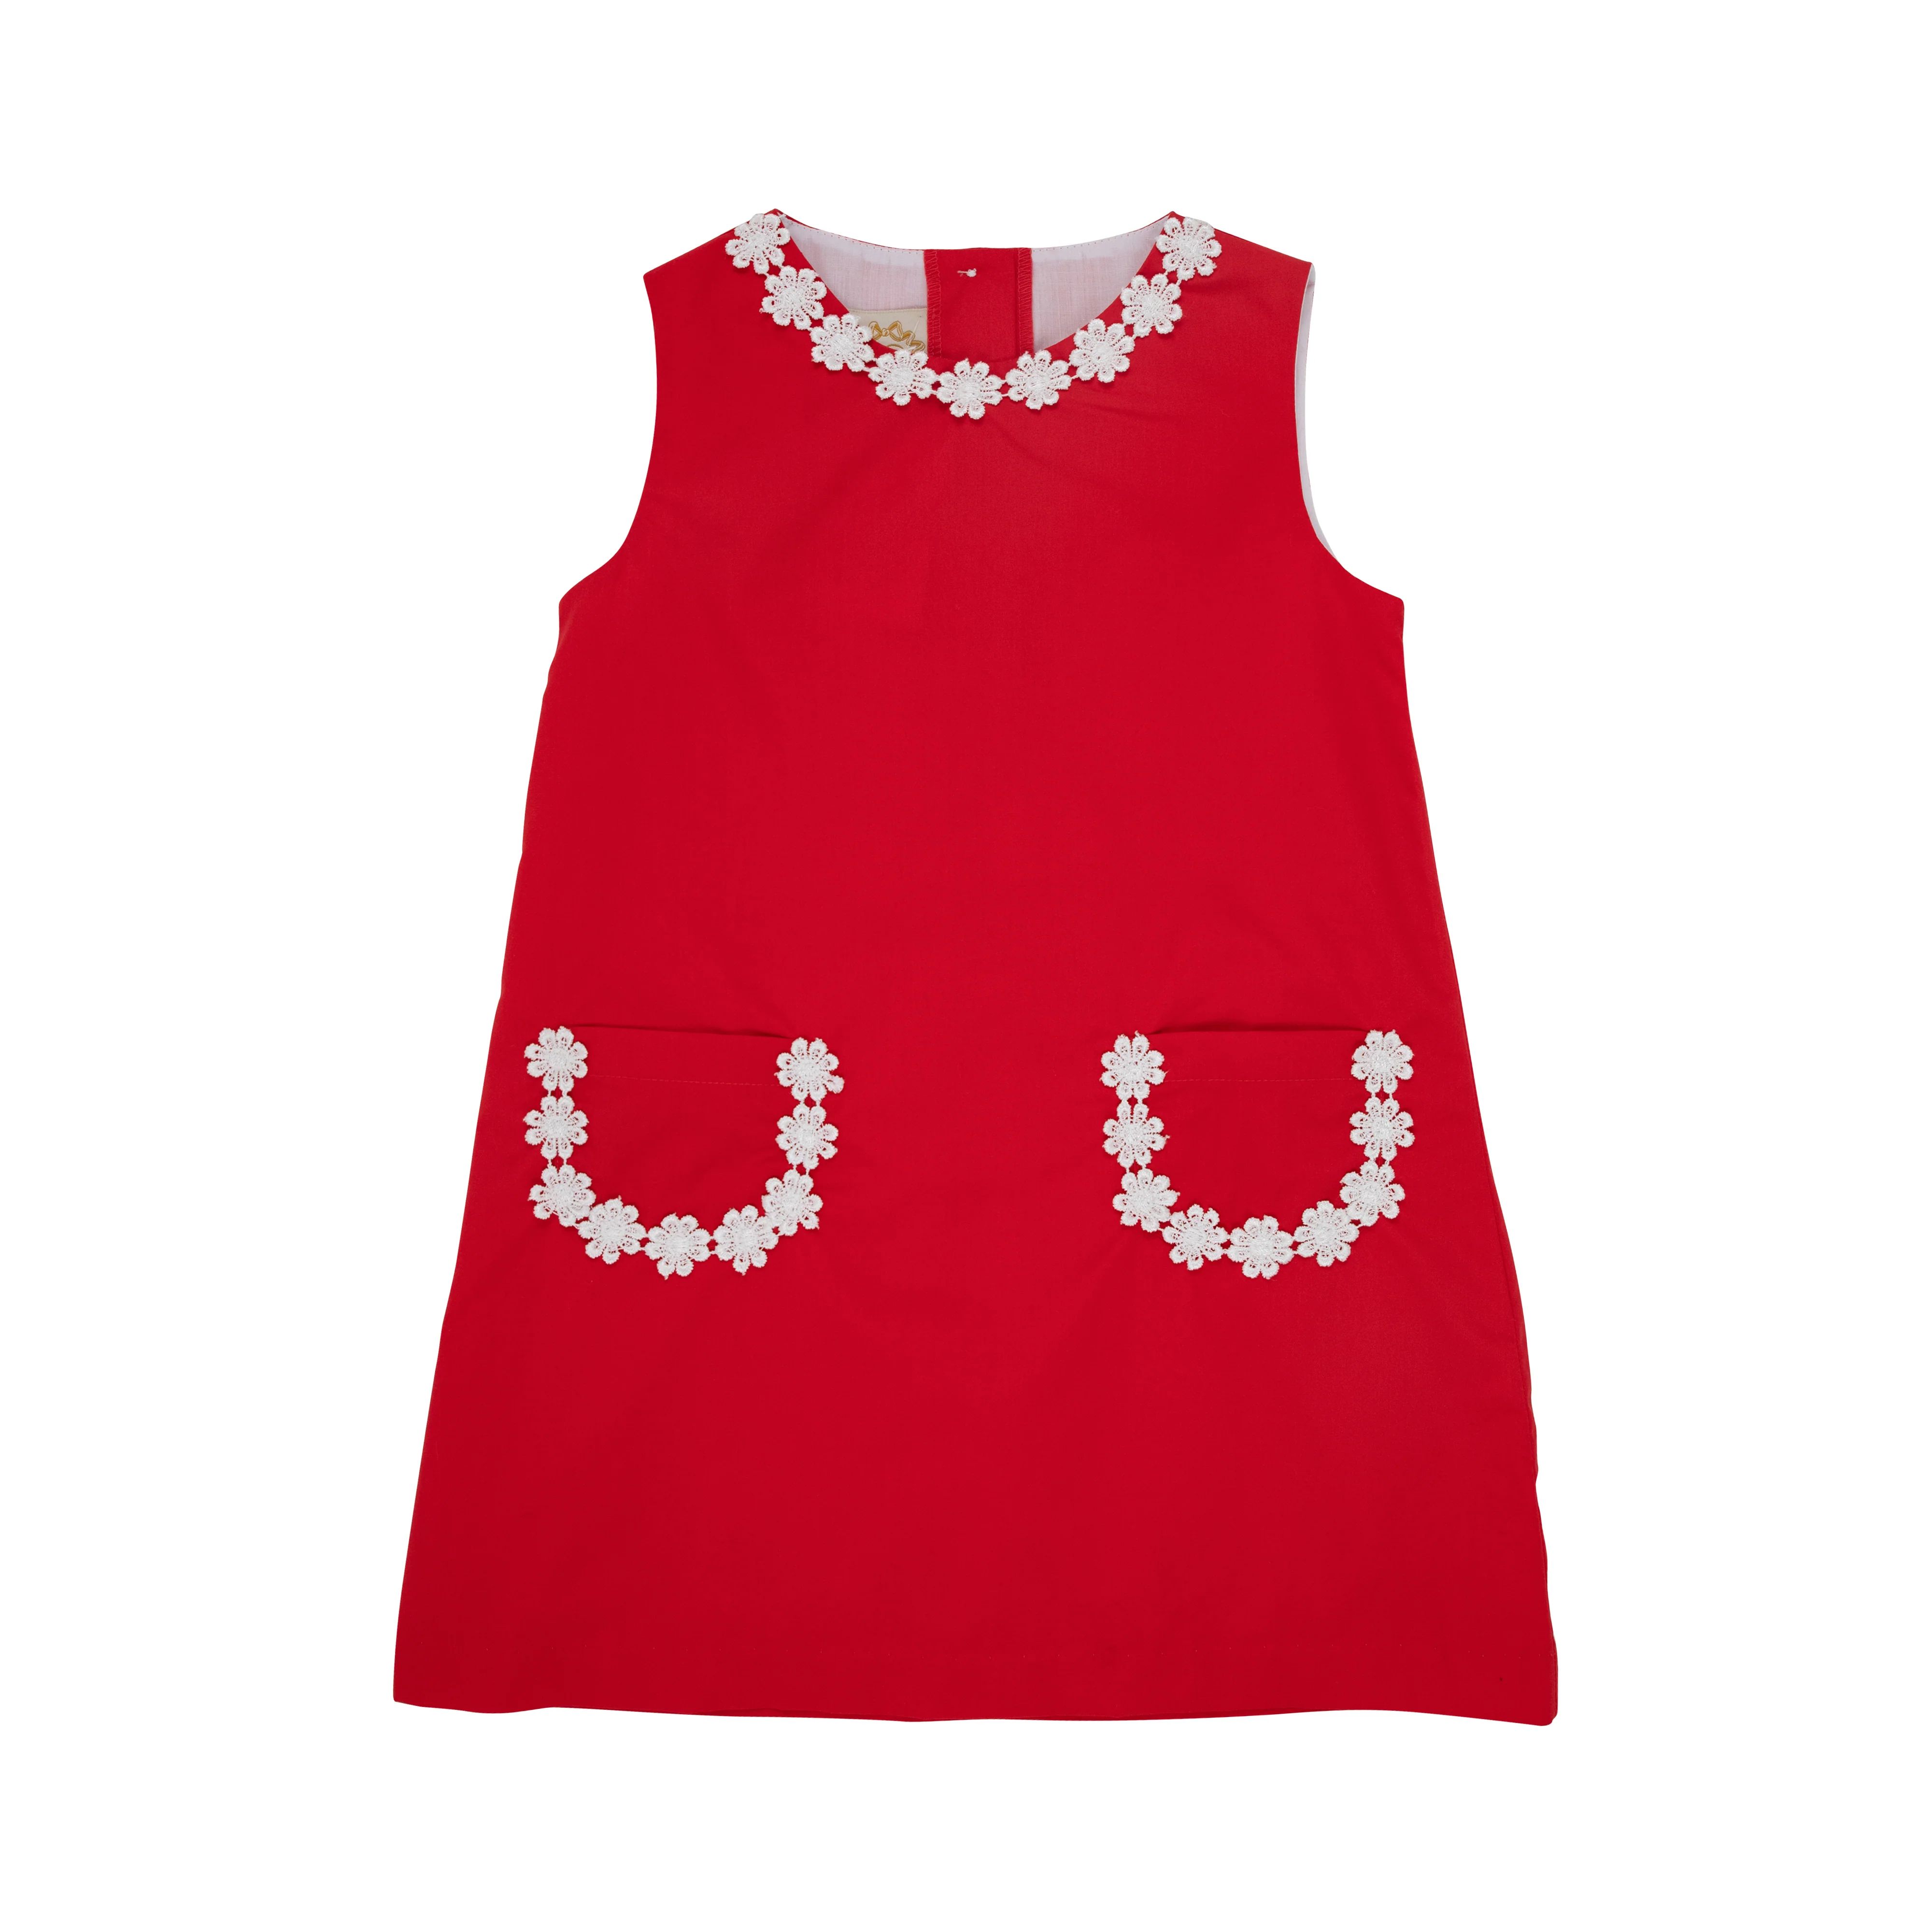 Primland Play Dress - Richmond Red with Worth Avenue White Daisies | The Beaufort Bonnet Company